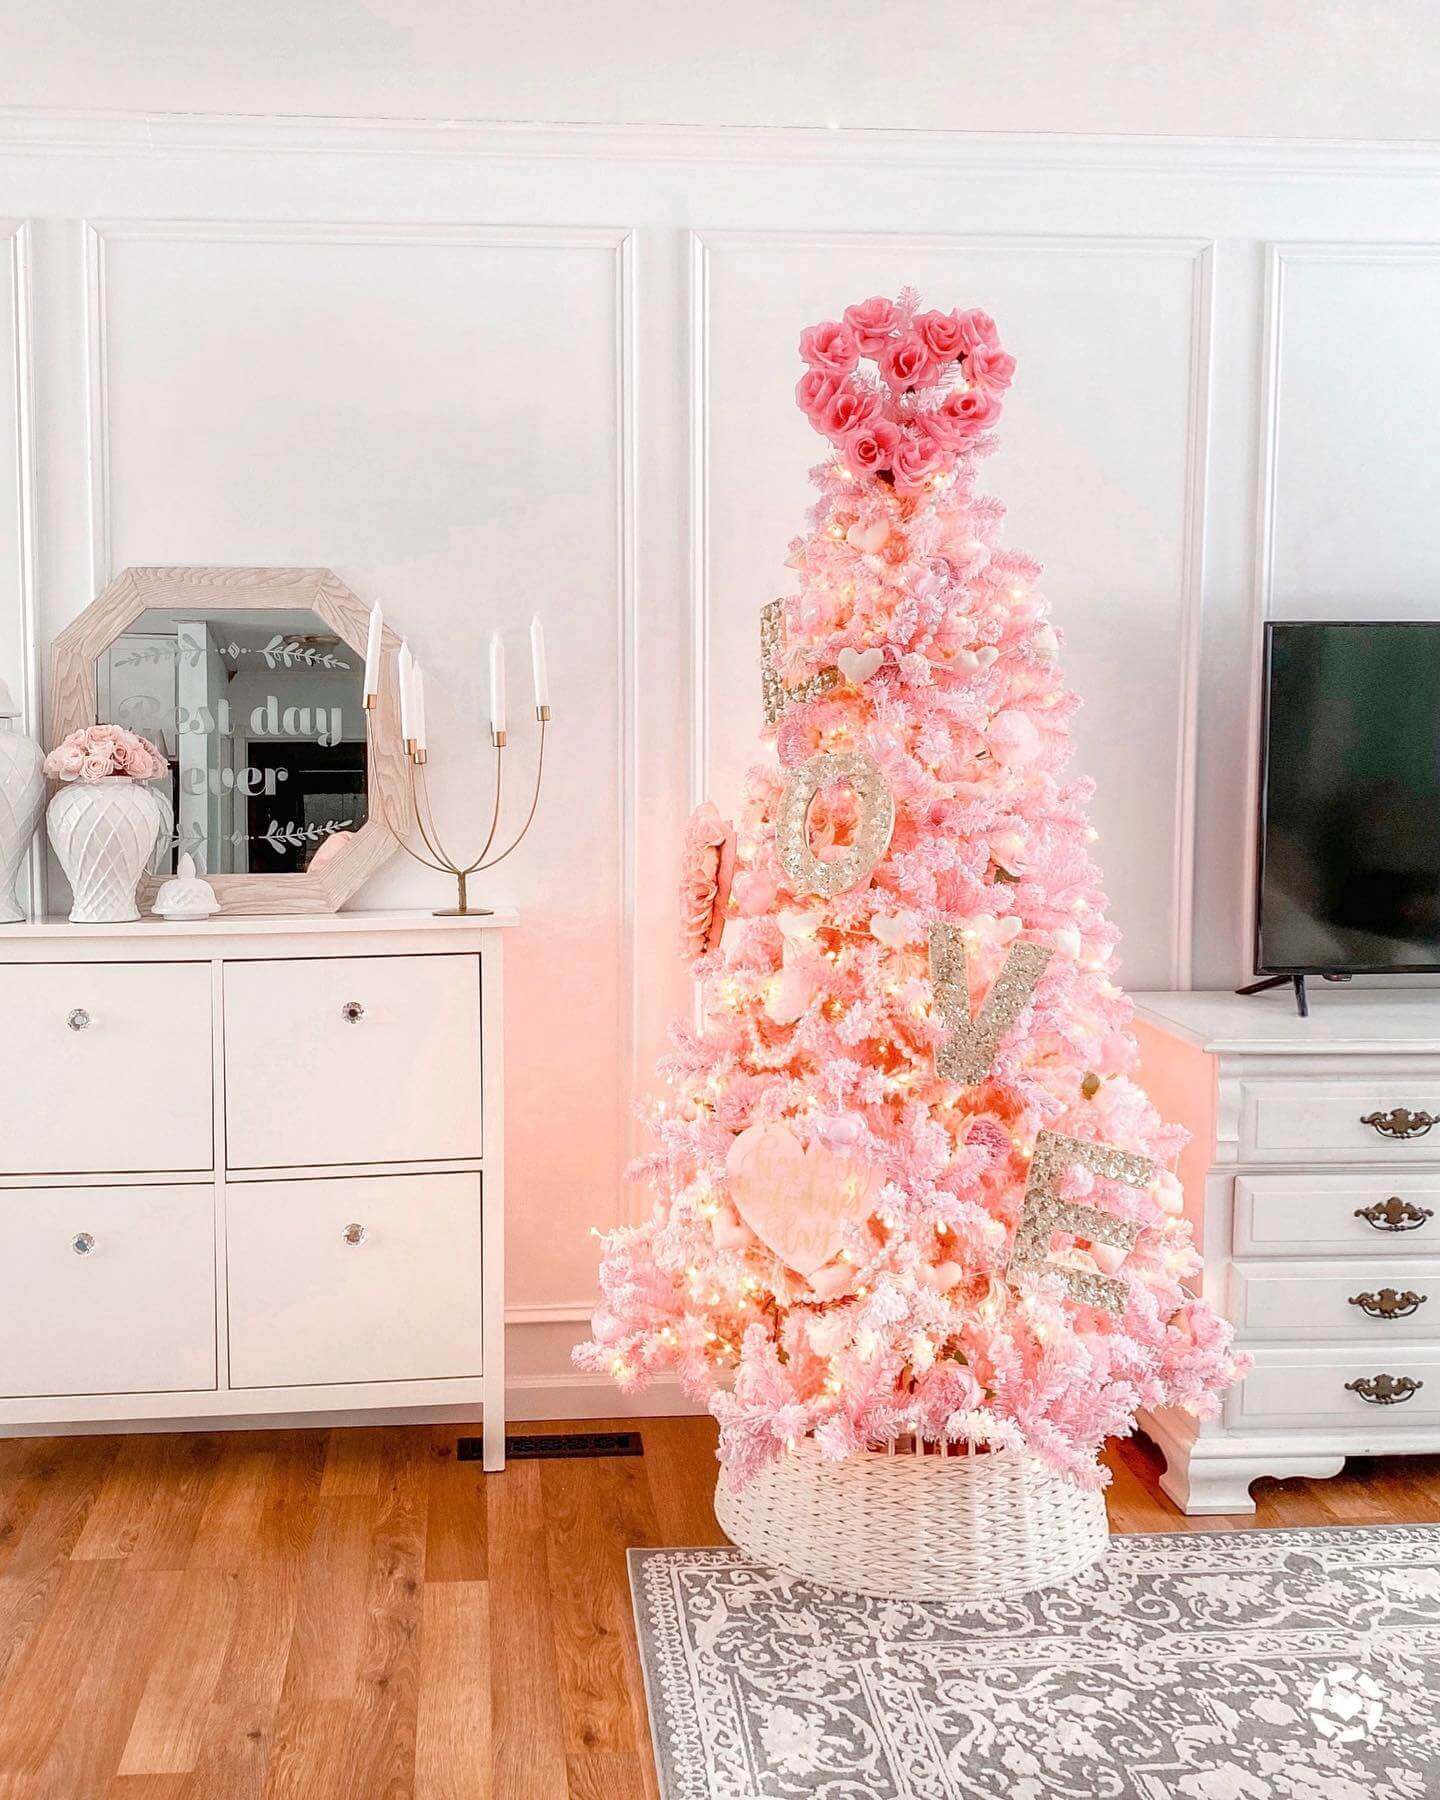 King of Christmas 7.5' Duchess Pink Flock Artificial Christmas Tree with 600 Warm White LED Lights